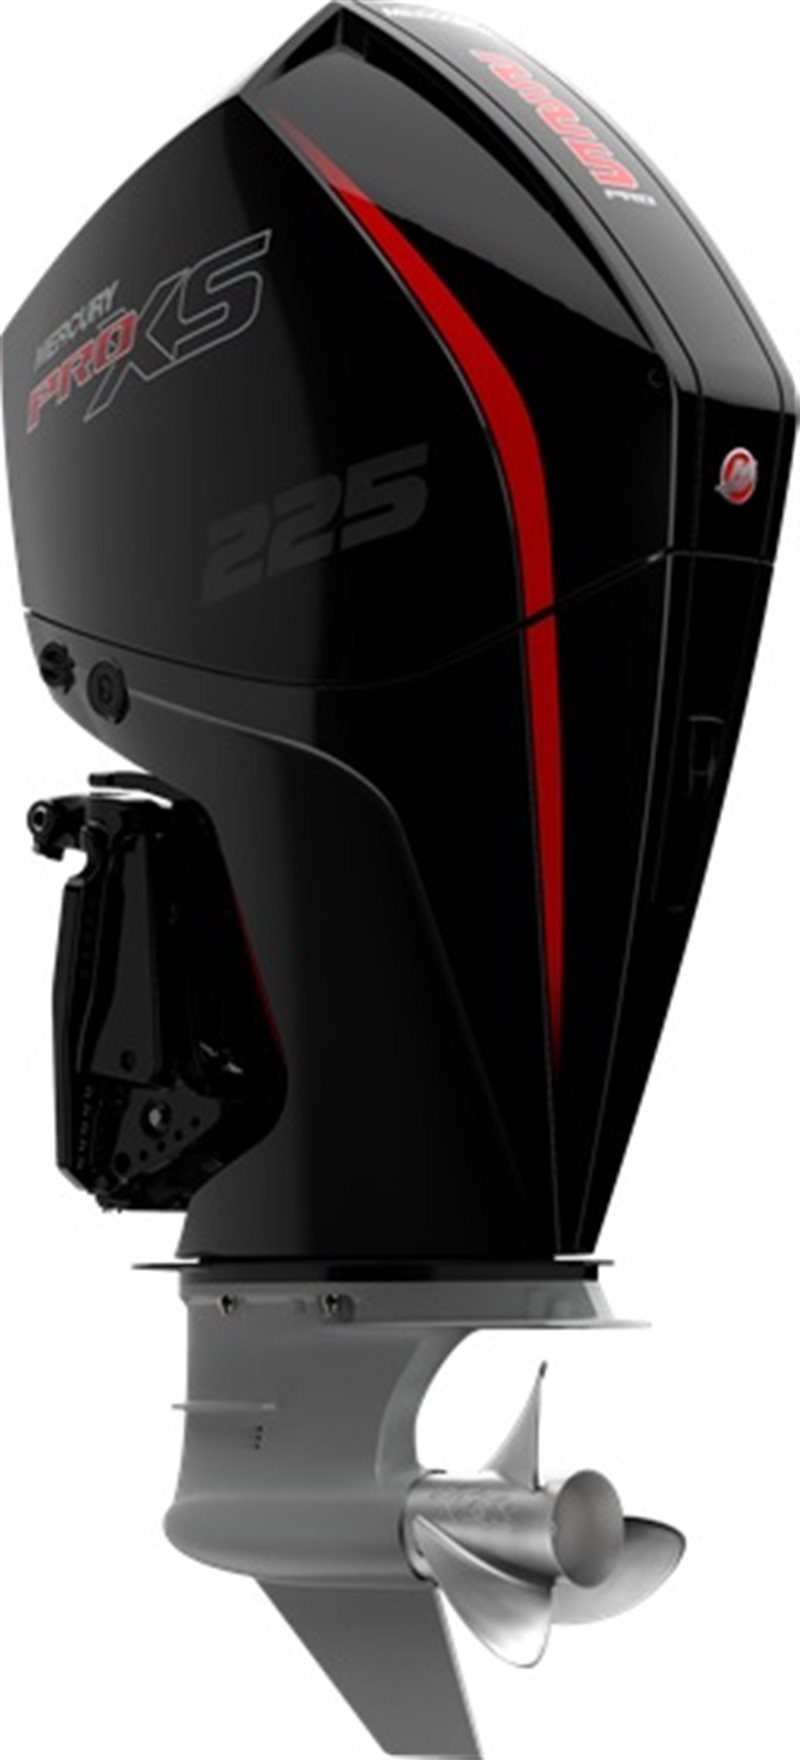 2020 Mercury Outboard Pro XS 175 - 300 Pro XS 225 at Fort Fremont Marine